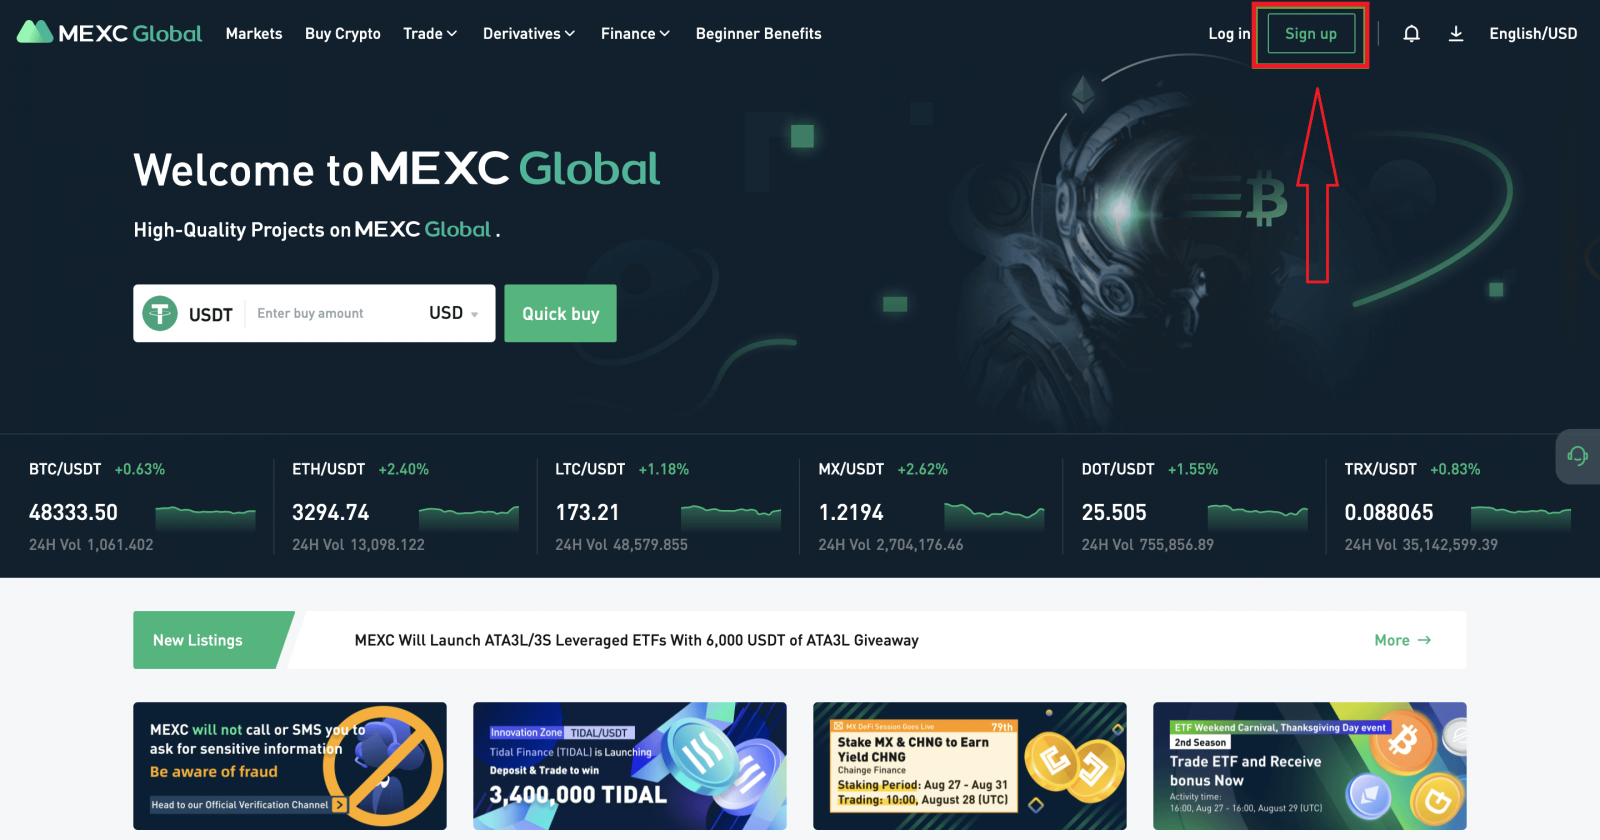 How to Open a Trading Account in MEXC